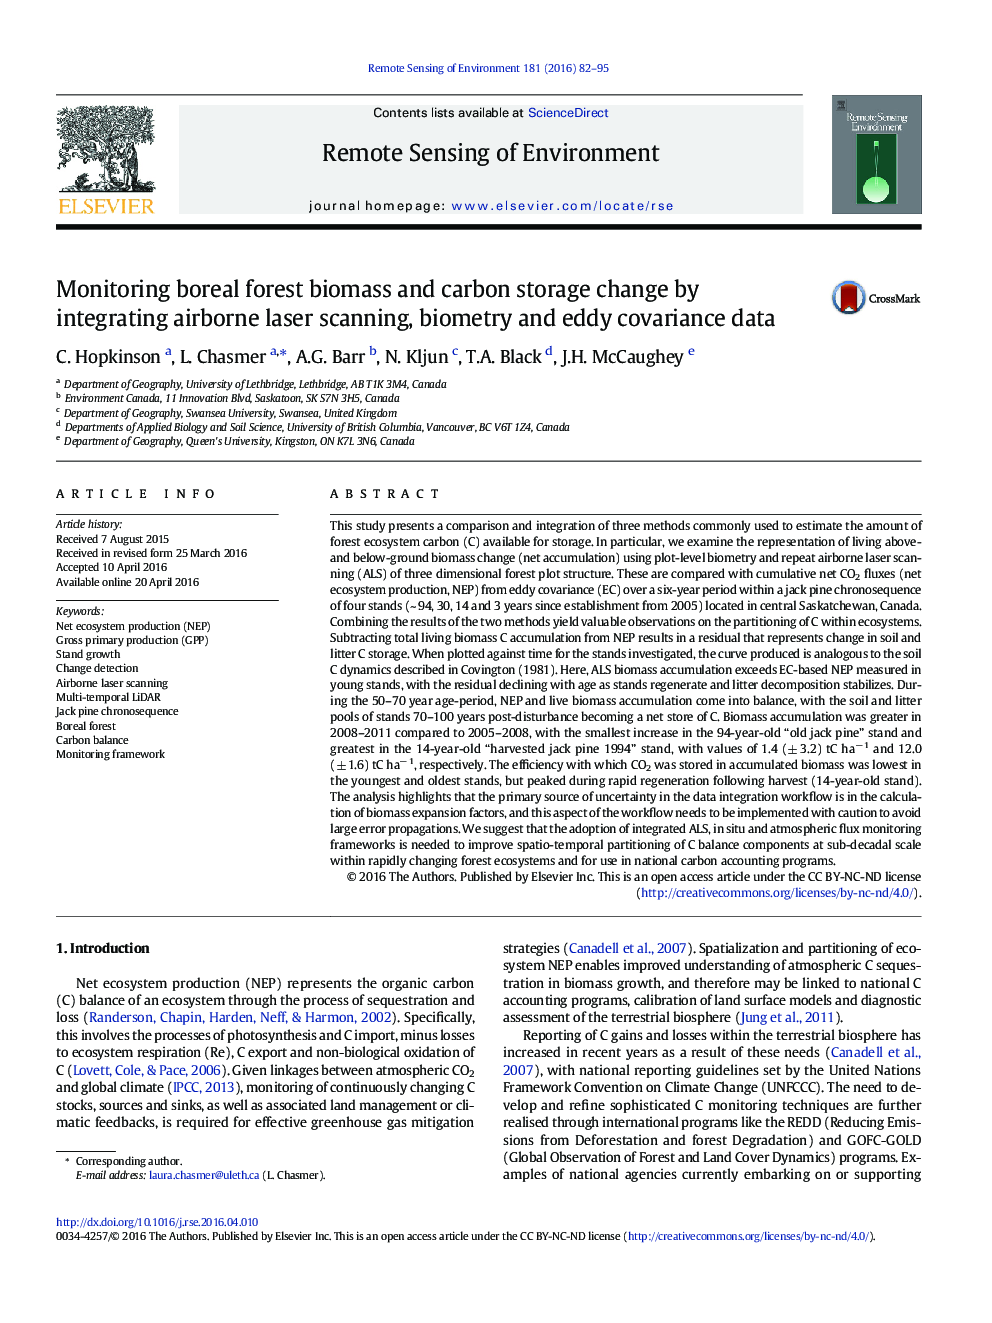 Monitoring boreal forest biomass and carbon storage change by integrating airborne laser scanning, biometry and eddy covariance data